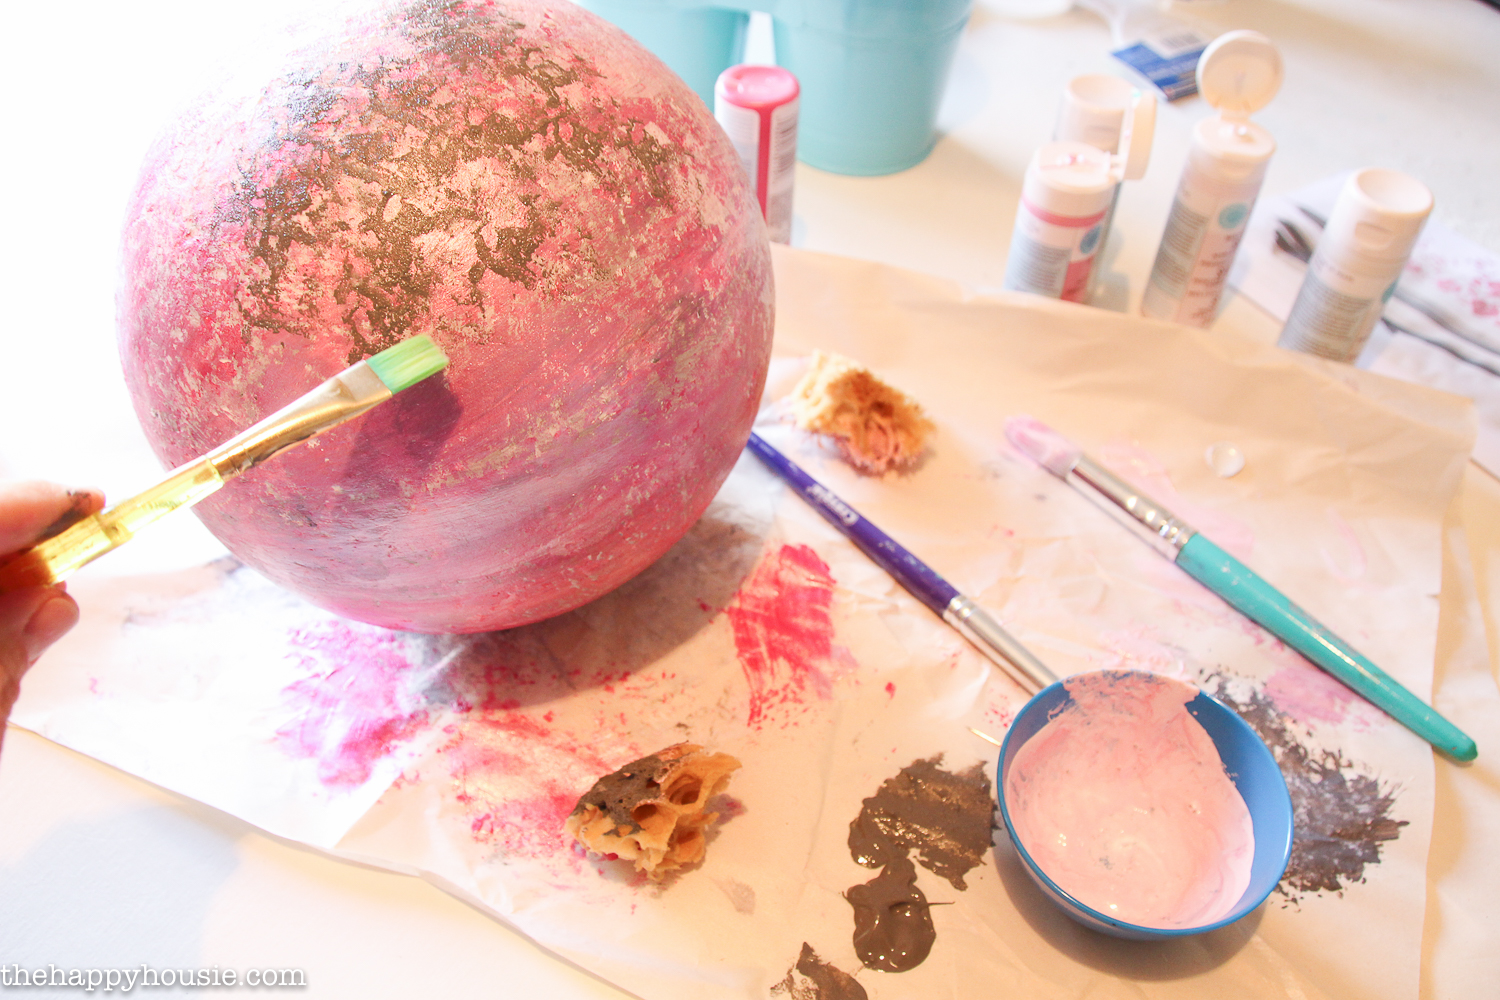 The sphere, paint and brushes on the table.